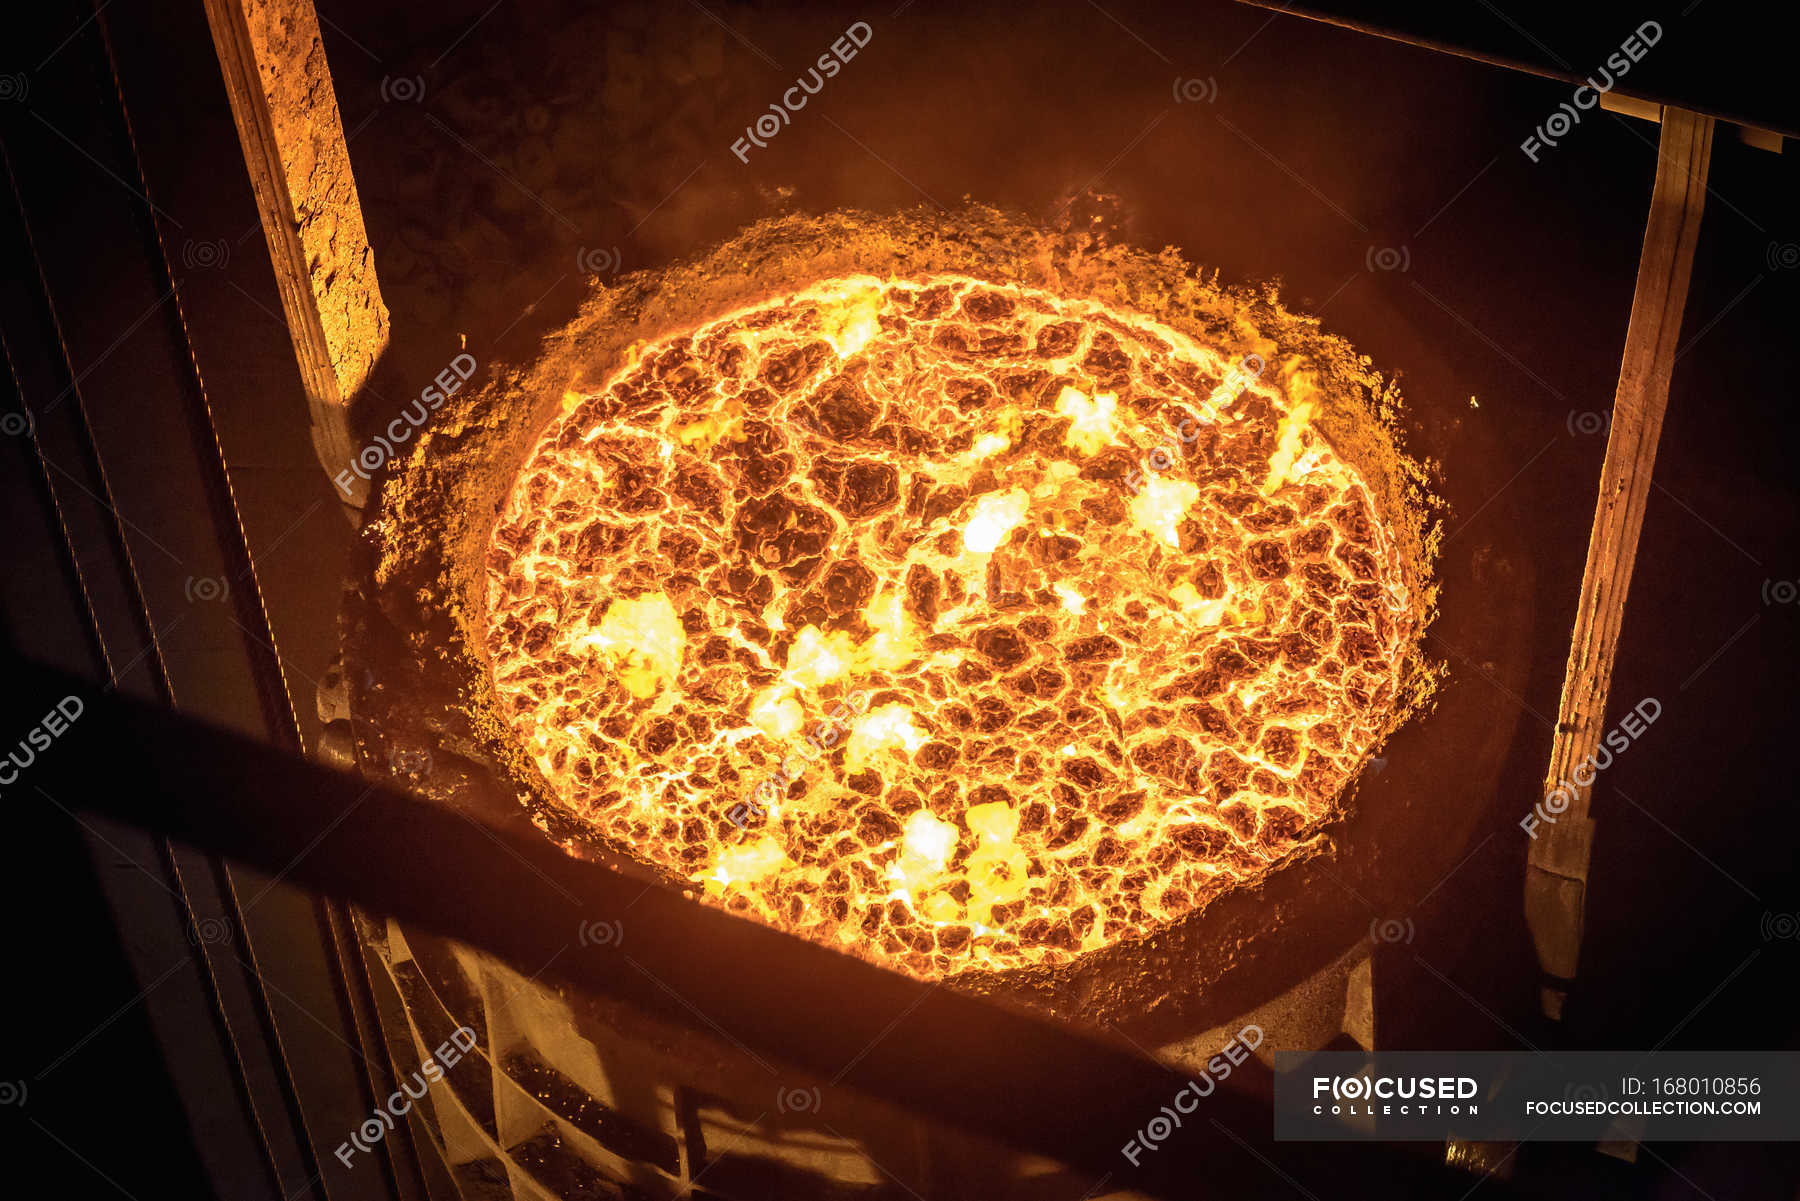 Download High Angle View Of Molten Steel Flask In Steelworks Illuminated Workshop Stock Photo 168010856 PSD Mockup Templates